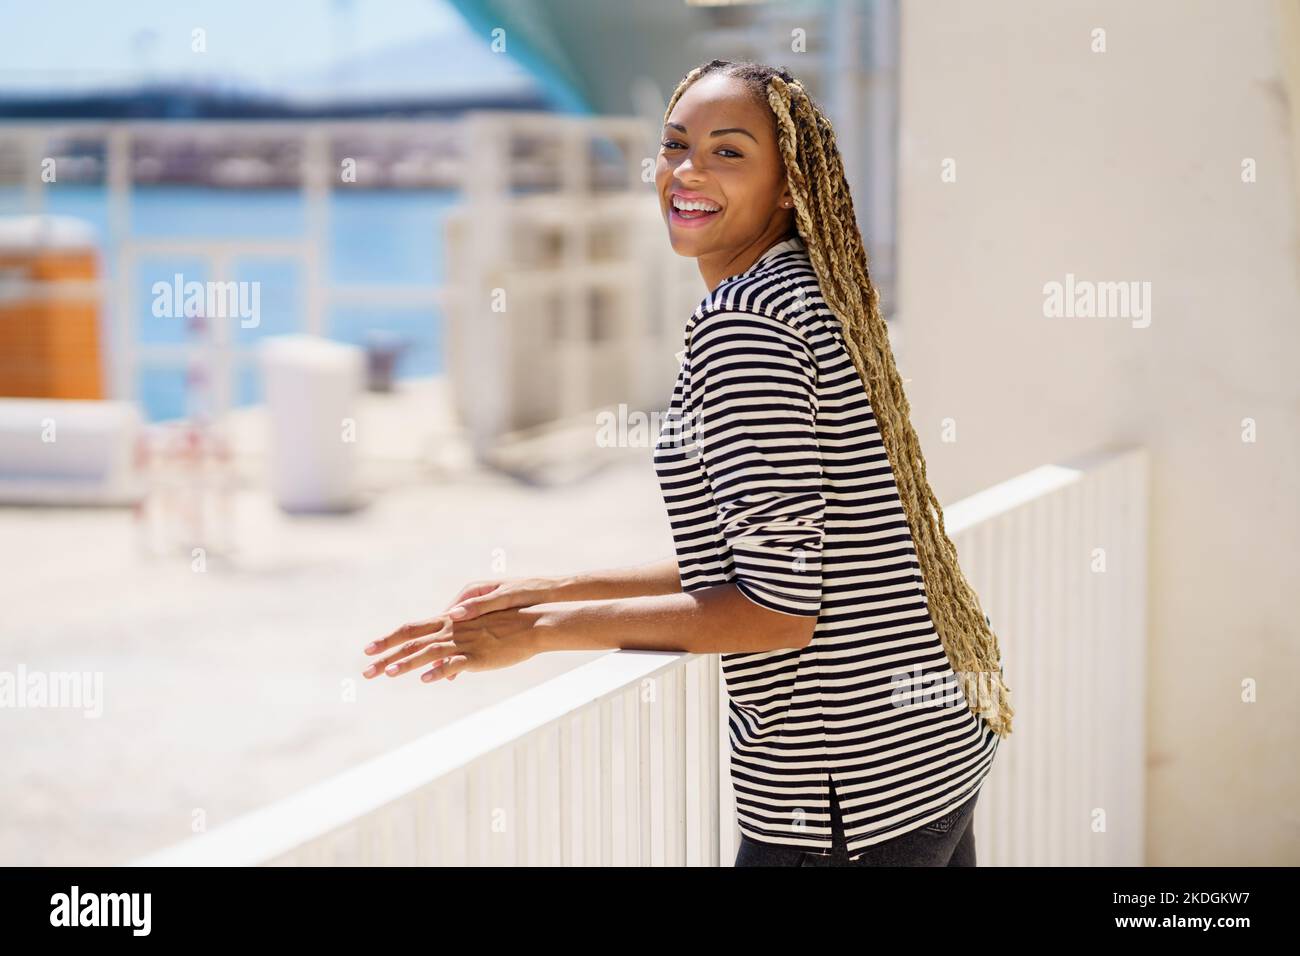 Young black woman enjoying the view of the seaport. Stock Photo